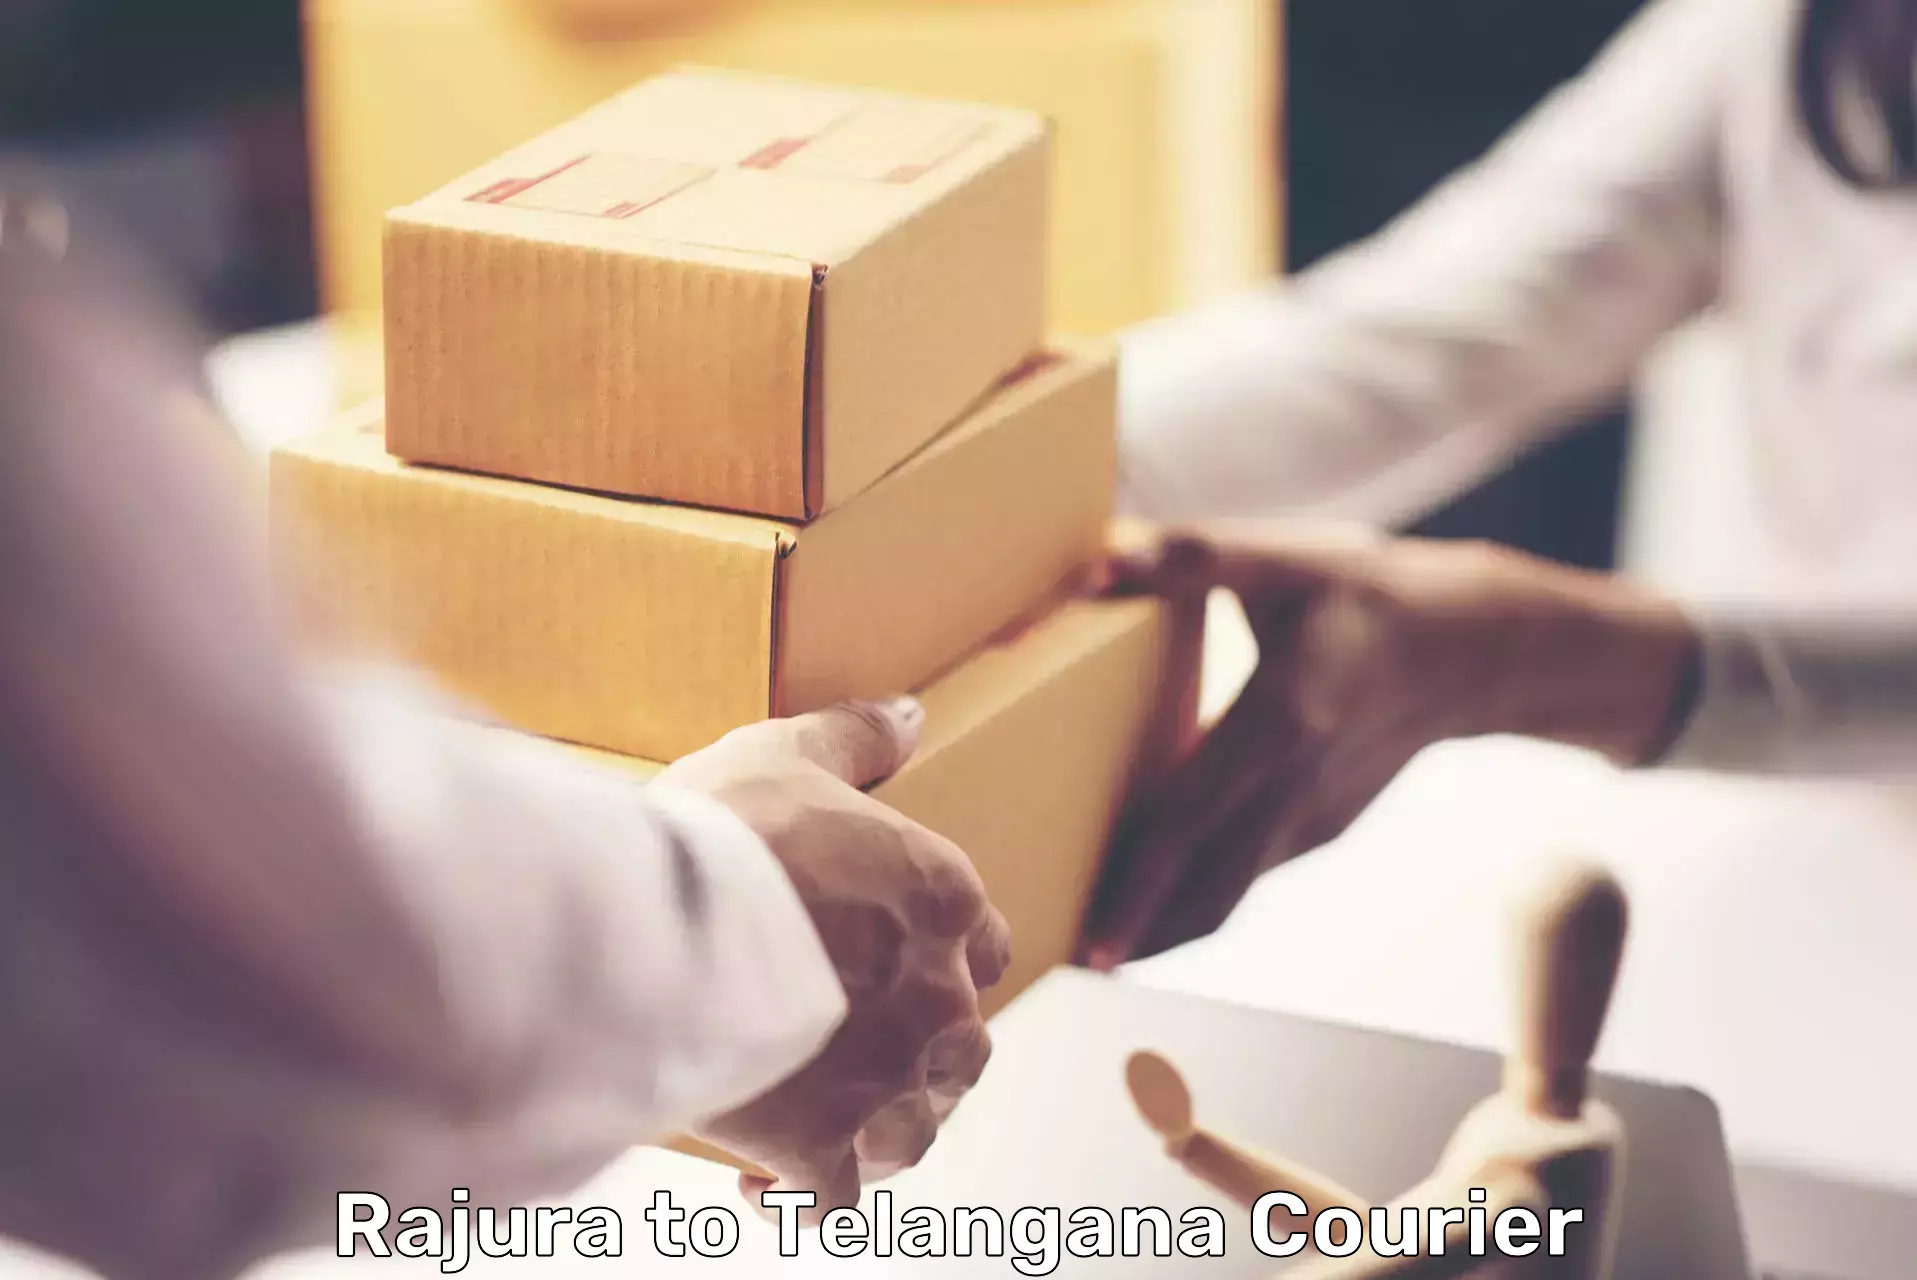 International courier networks Rajura to Husnabad